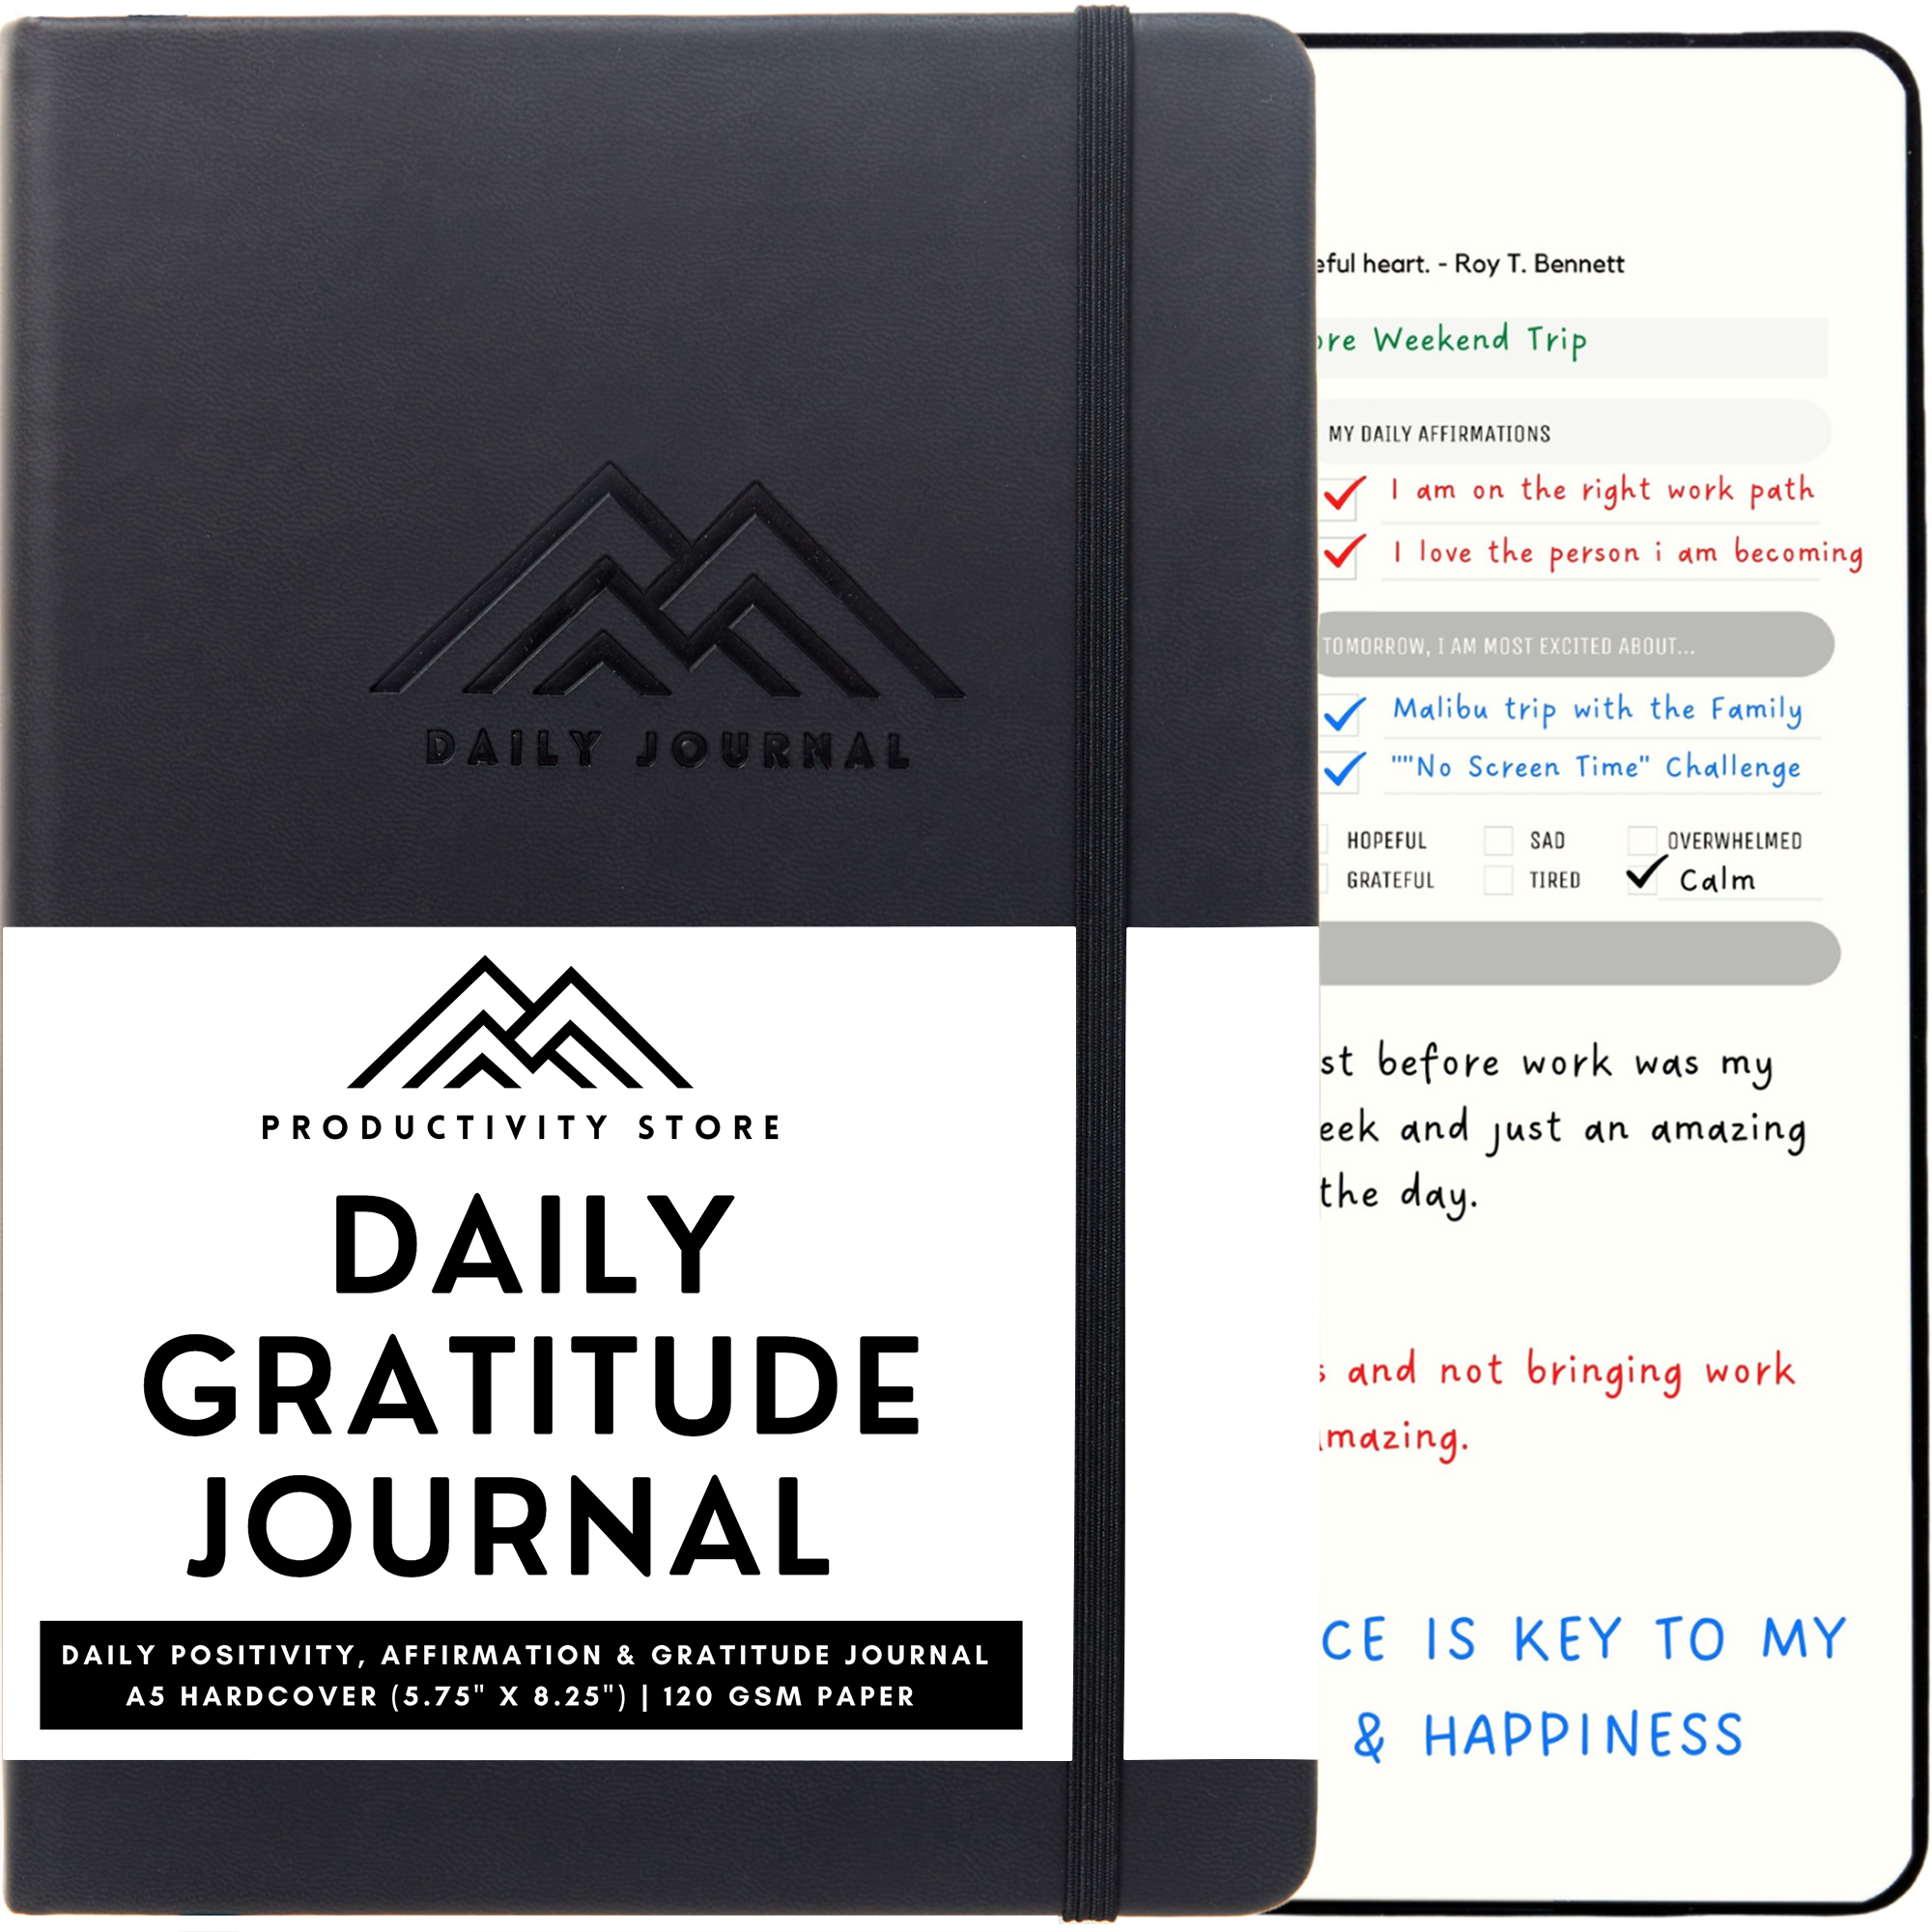 Gratitude Journaling: A Daily Practice for Inner Transformation and Growth